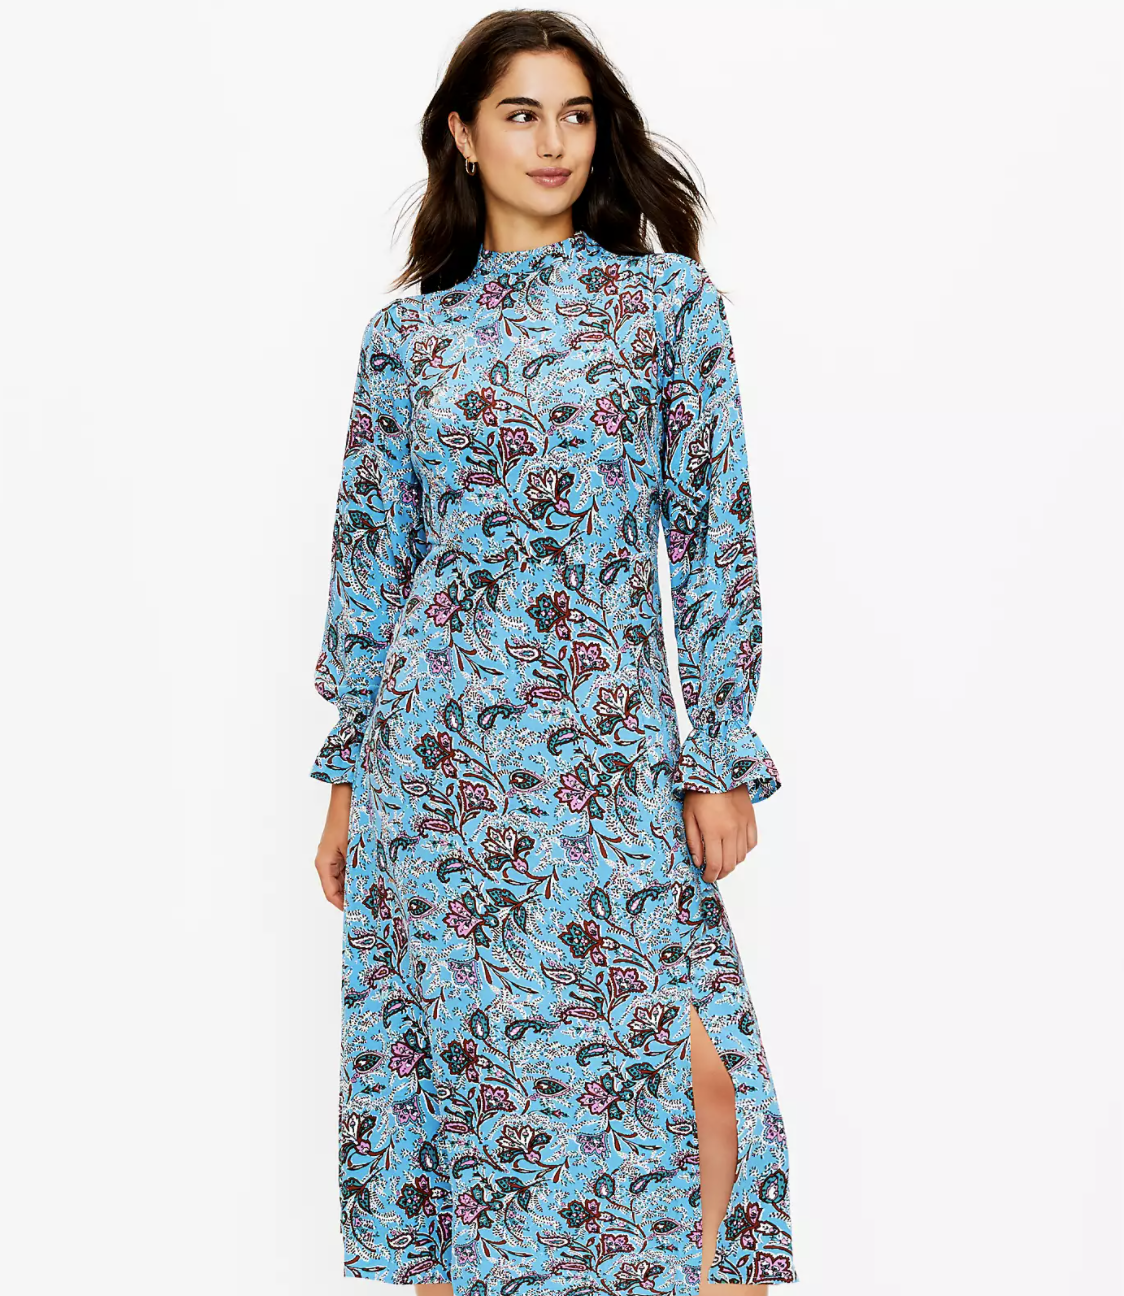 model in blue floral high neck long sleeve dress with a leg slit